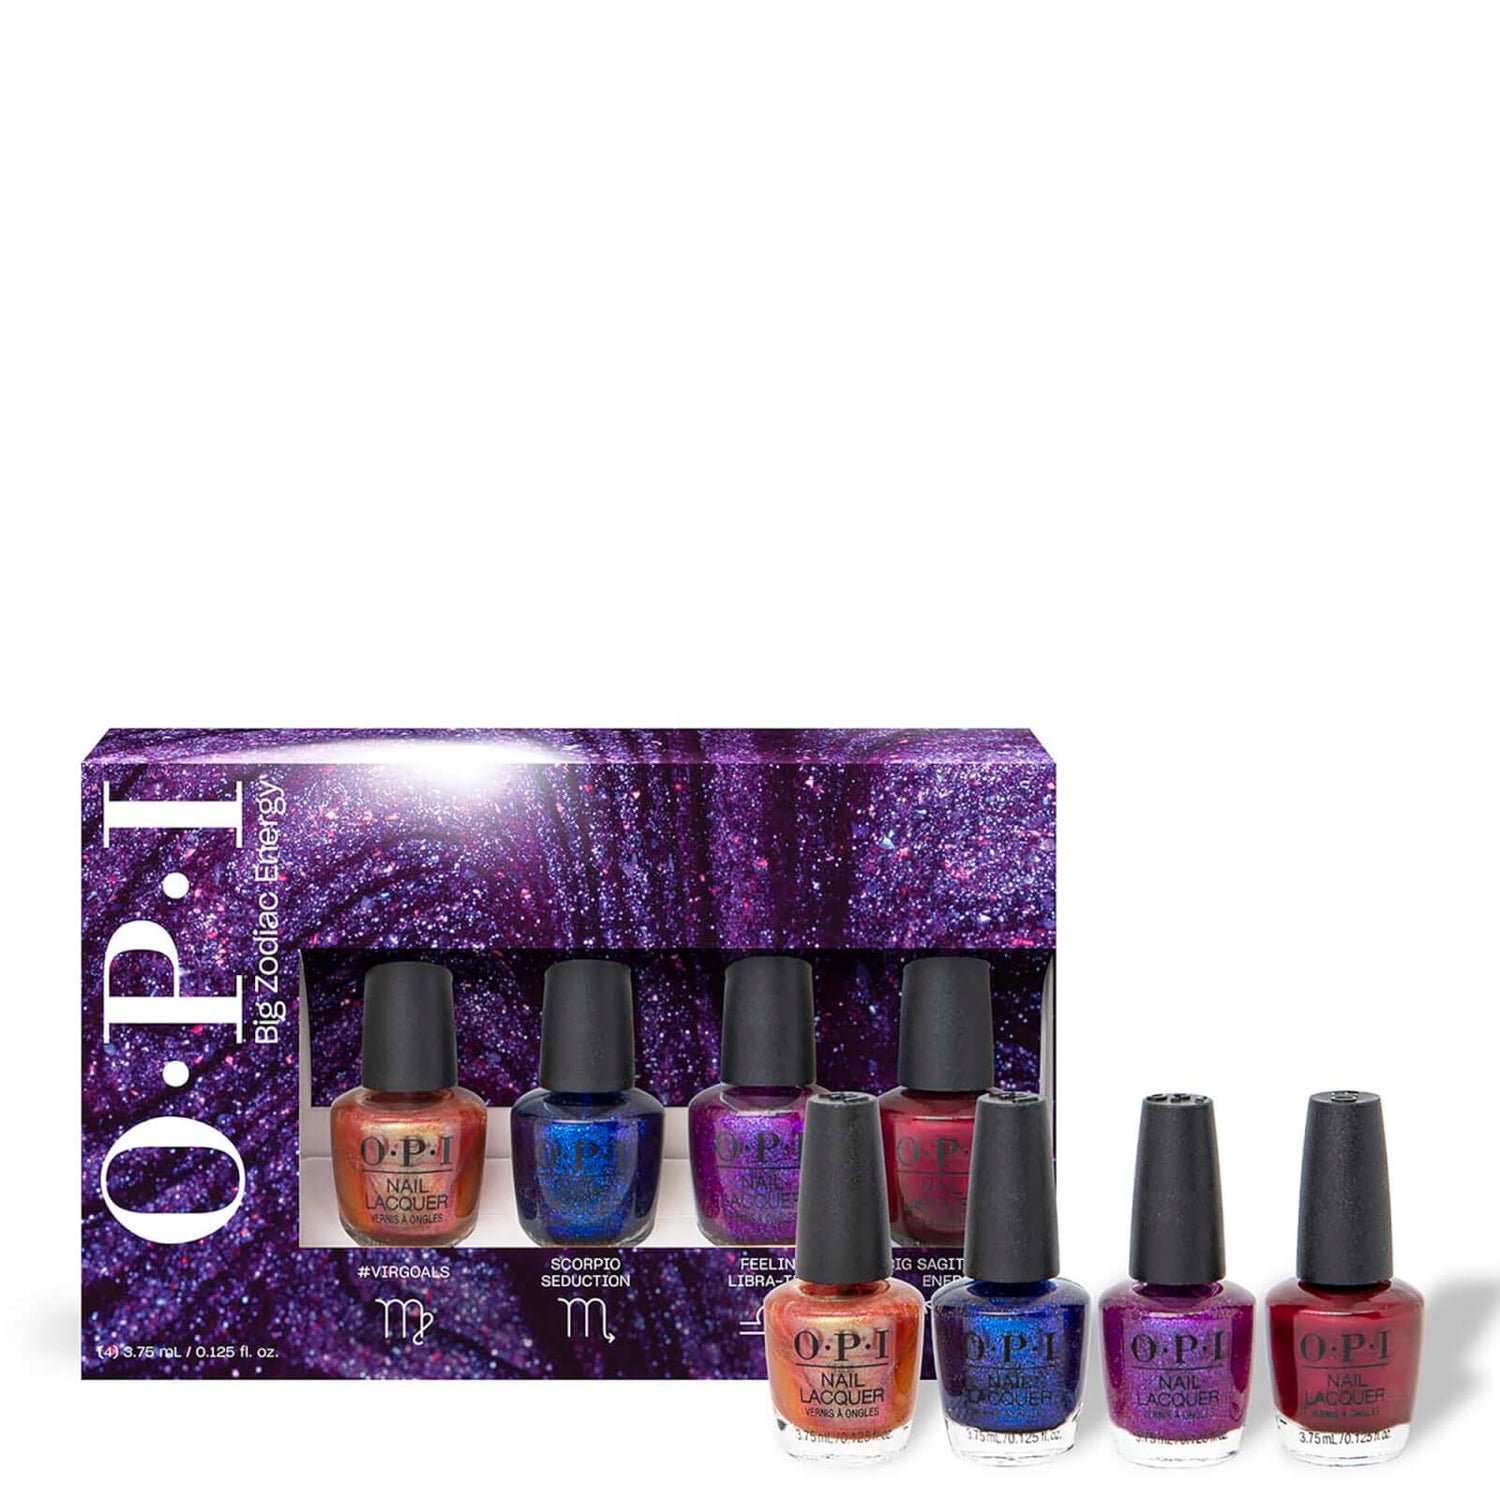 Long-lasting GelColor by OPI - Get Salon-Quality Nails